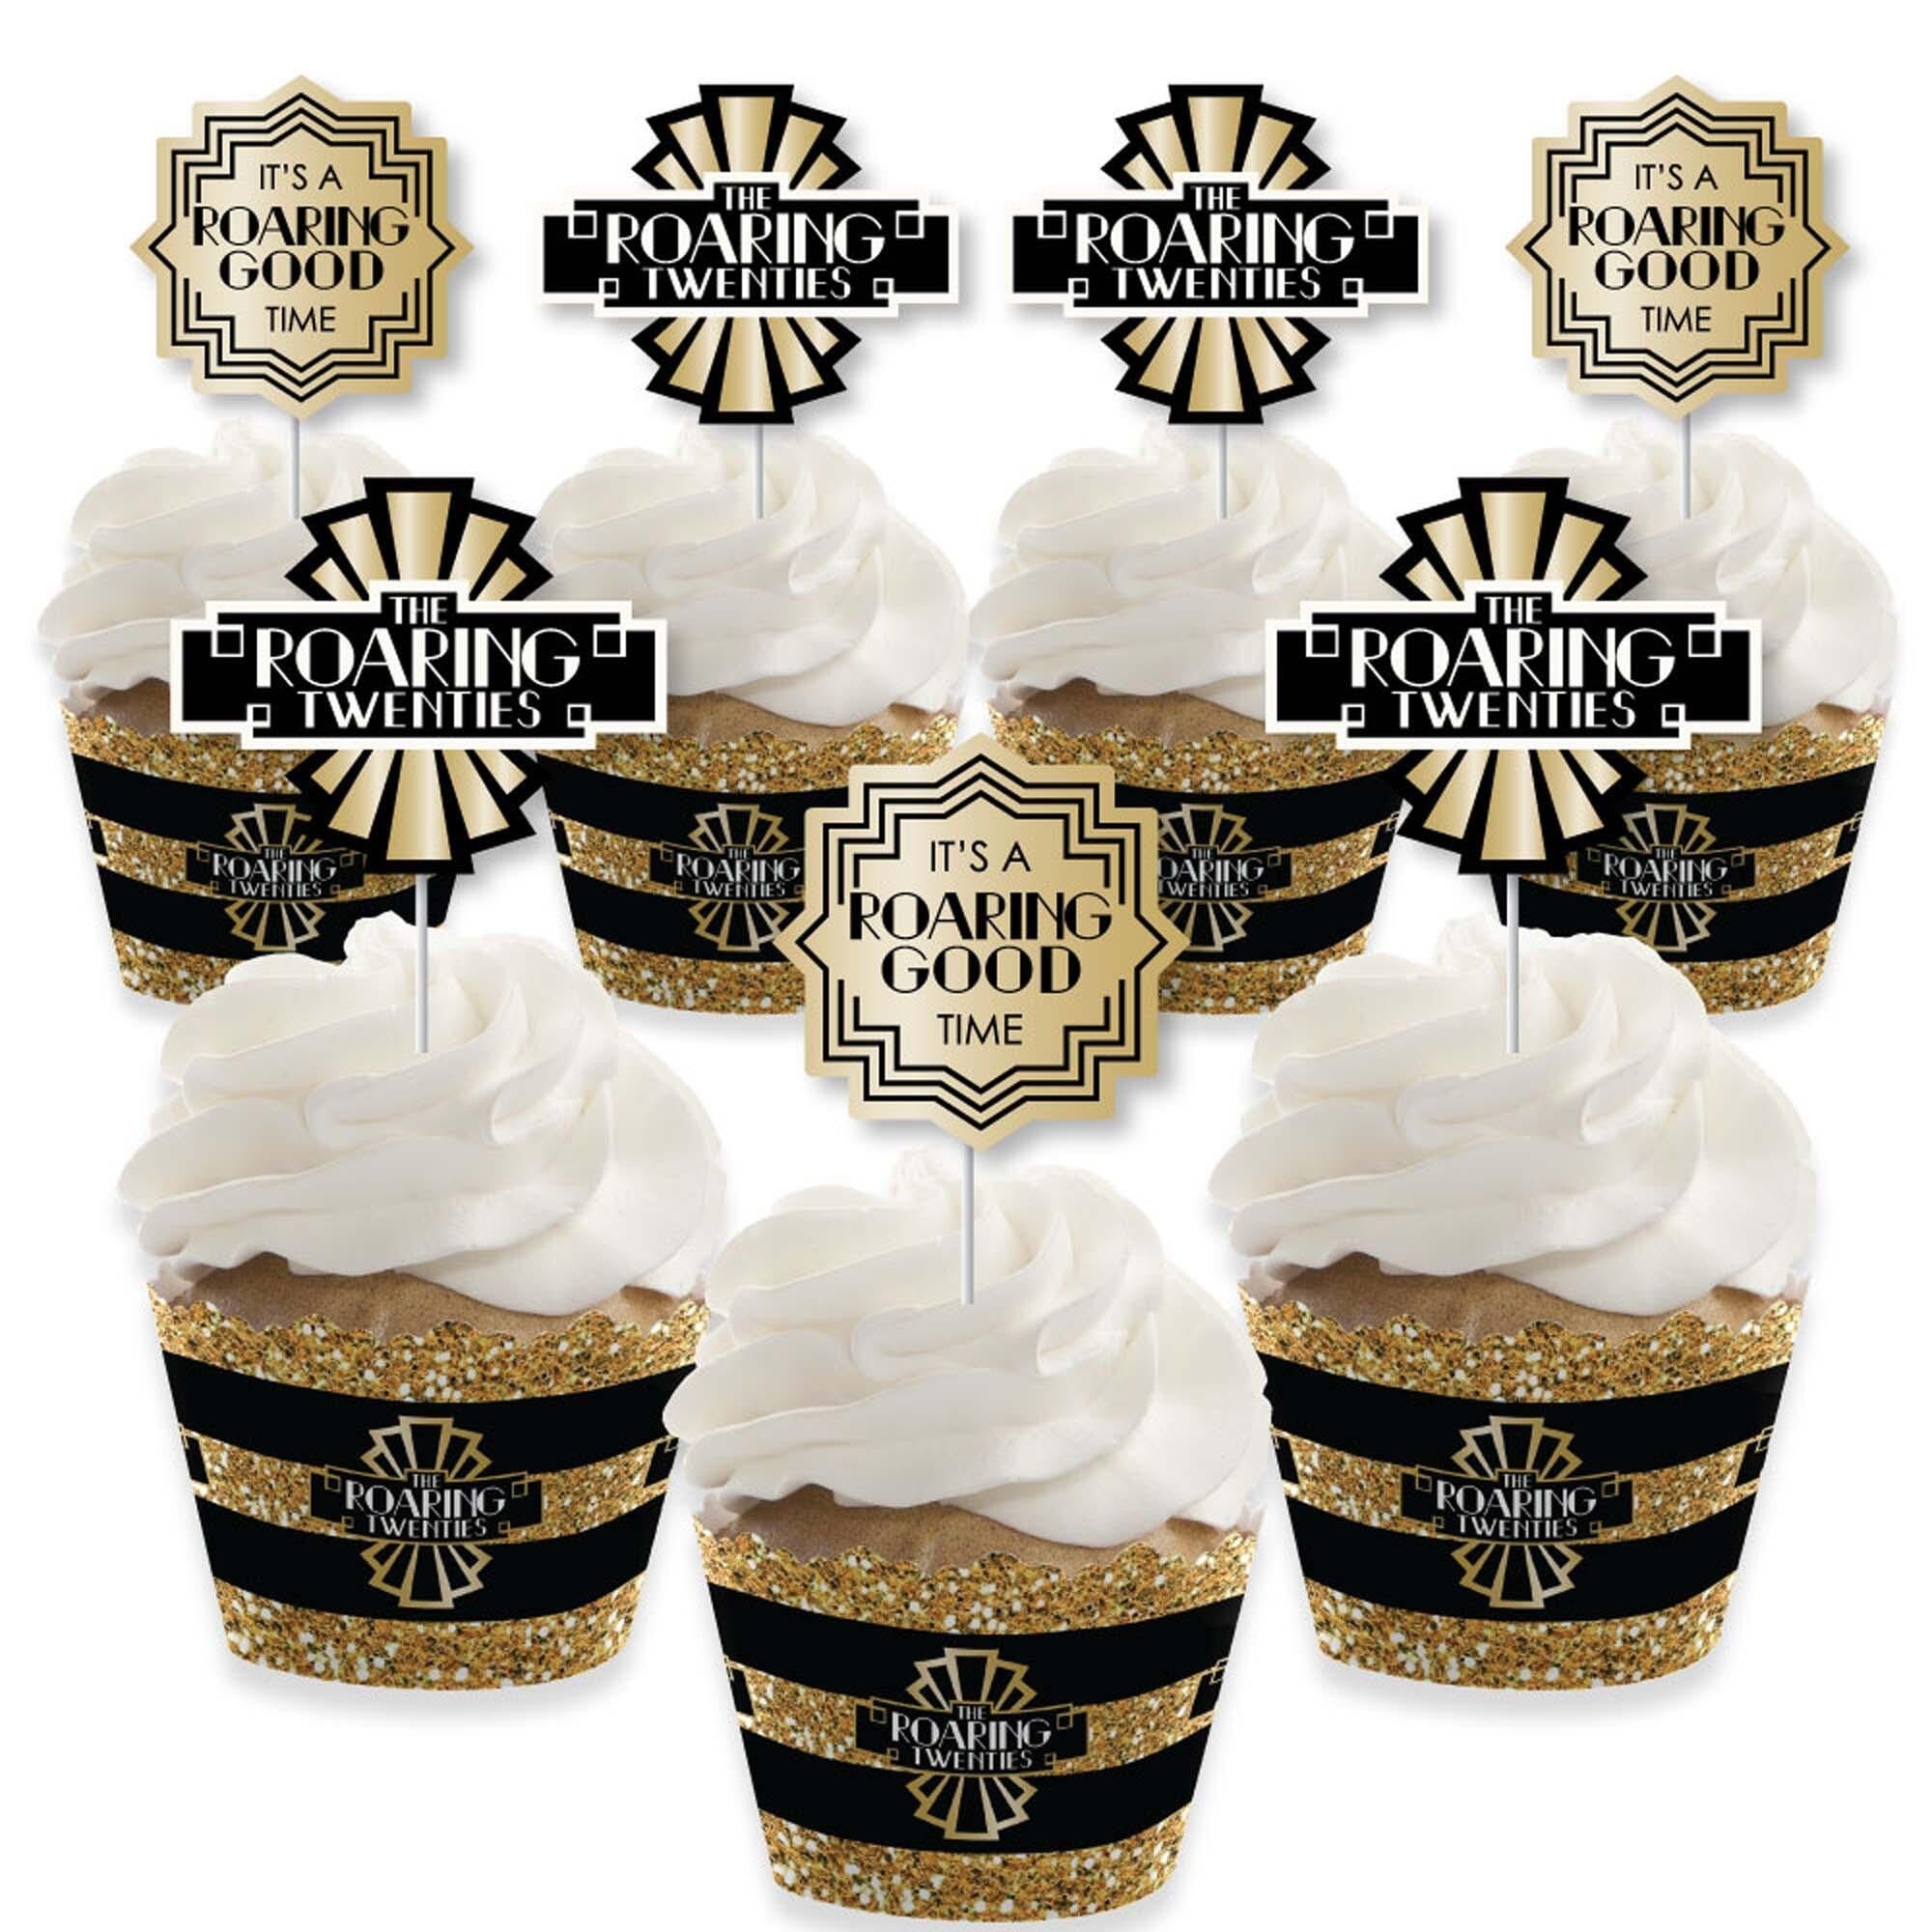 Roaring 20's - Cupcake Decorations - 1920s Art Deco Jazz Party Cupcake  Wrappers and Treat Picks Kit - 2020 Graduation Party - Set of 24